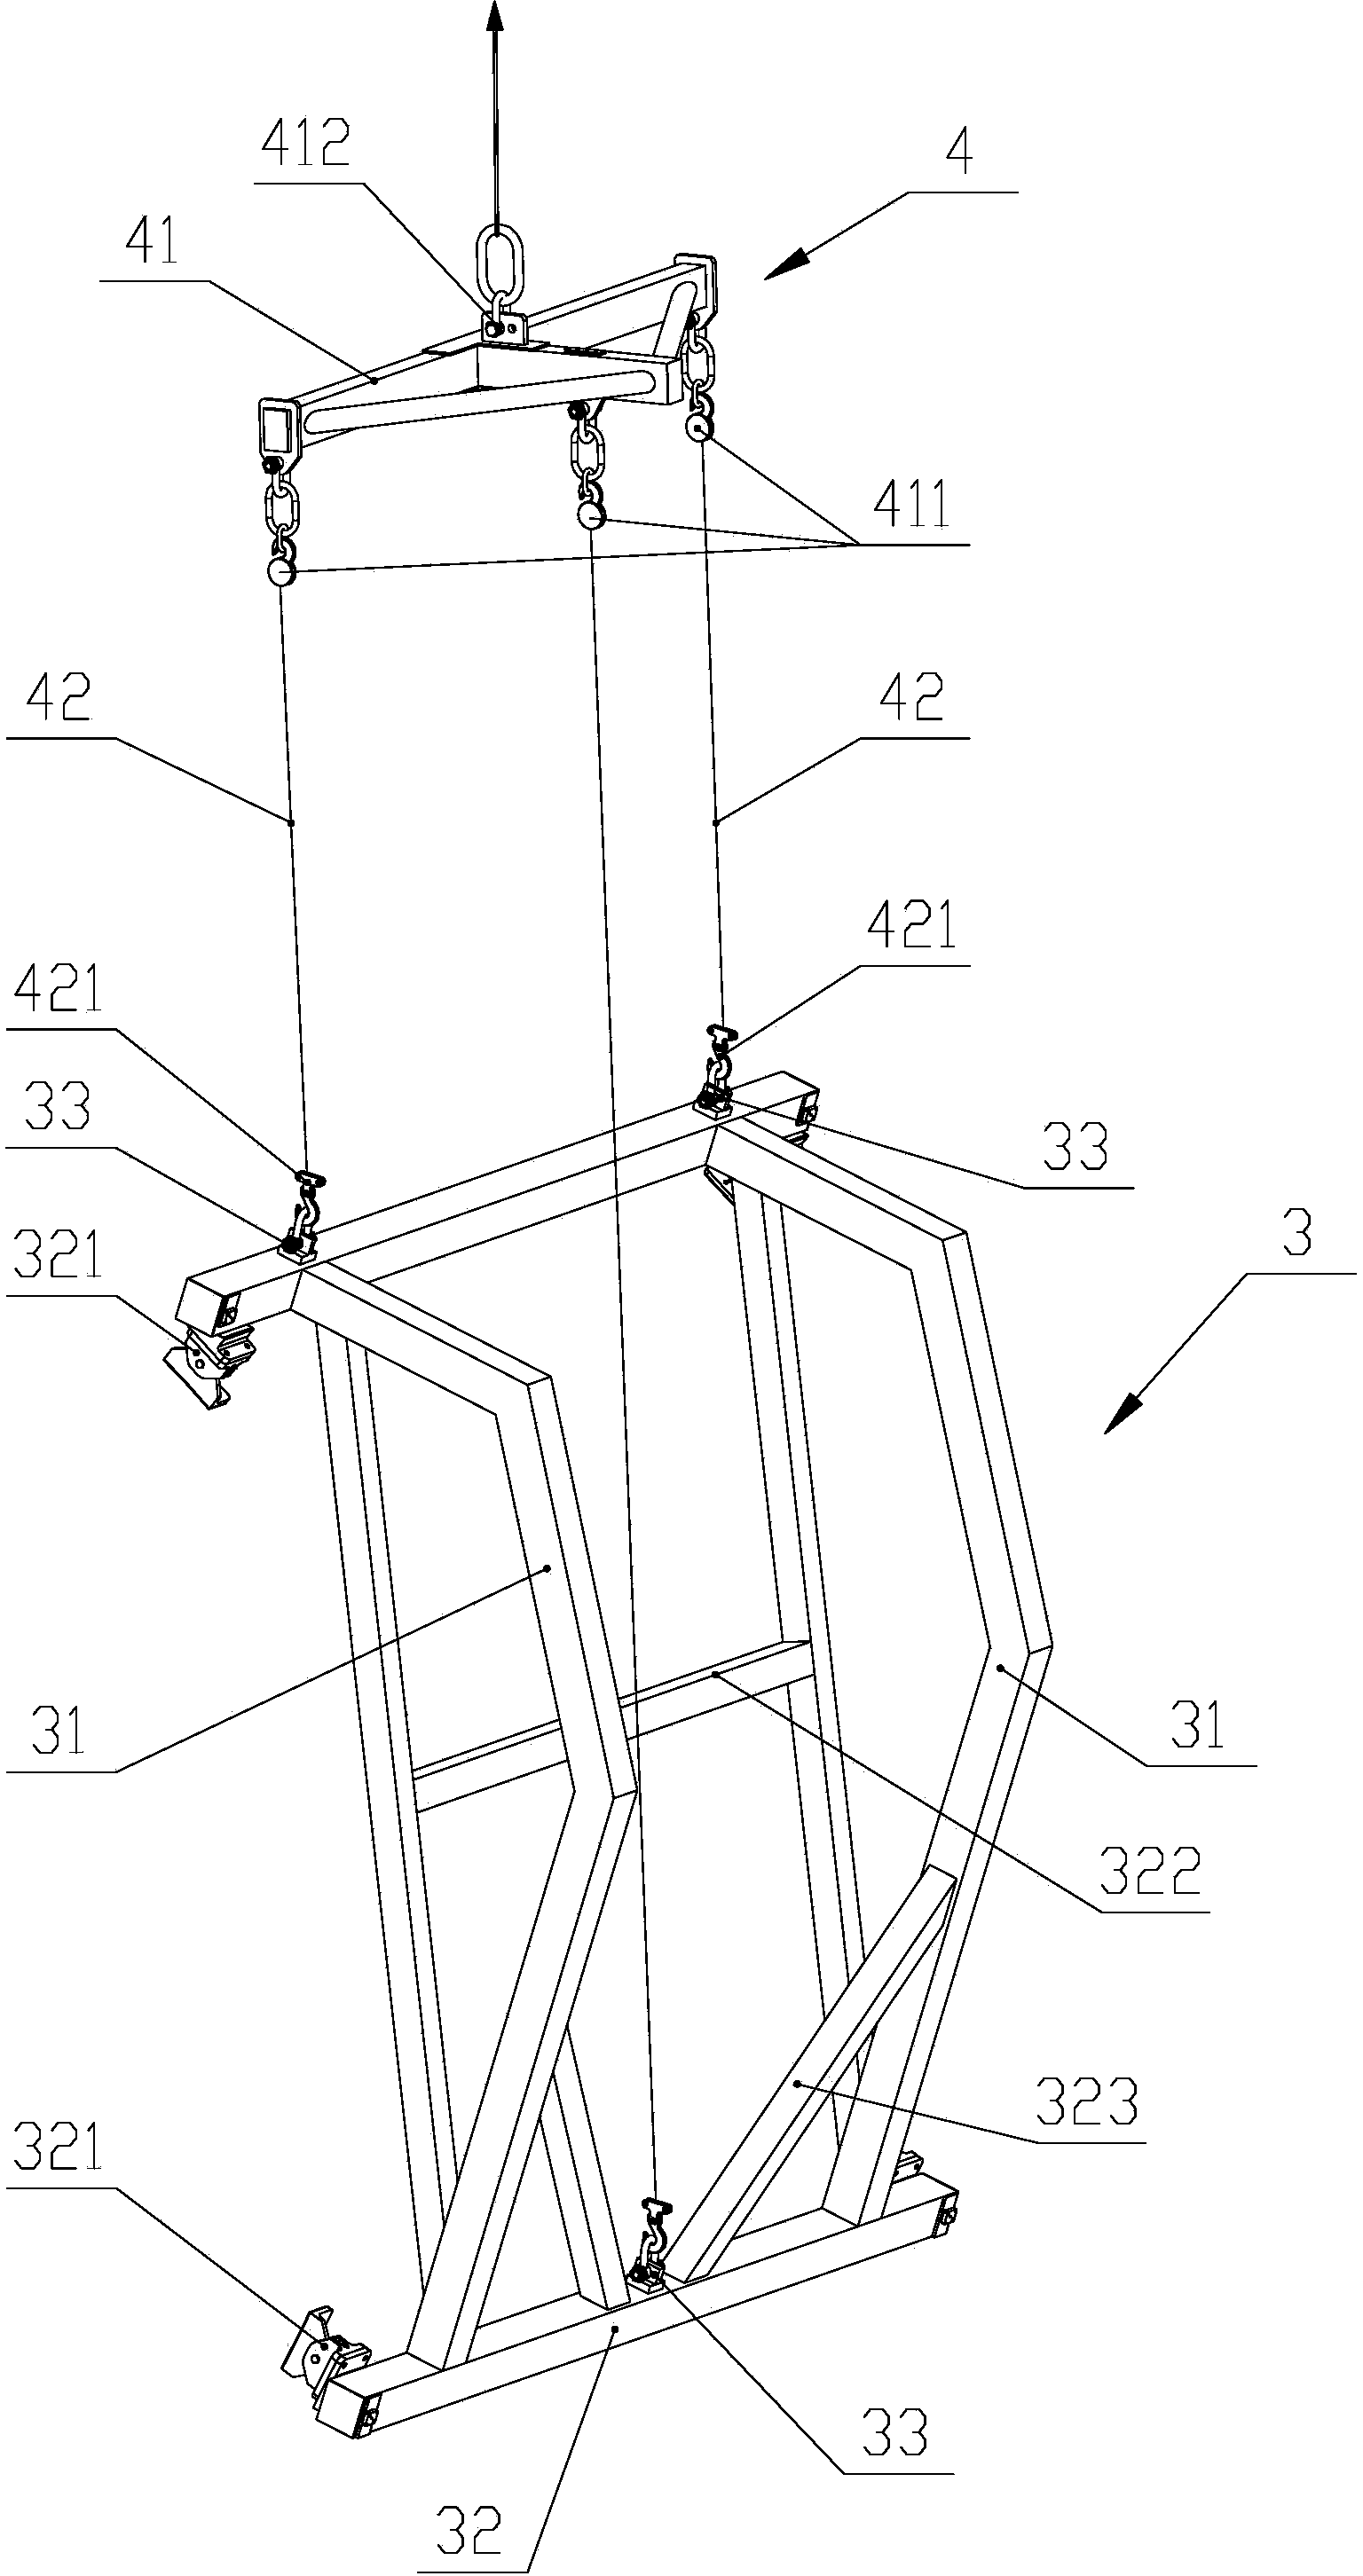 Method and tool for unloading wall panel assemblies at cargo space doors of airplanes